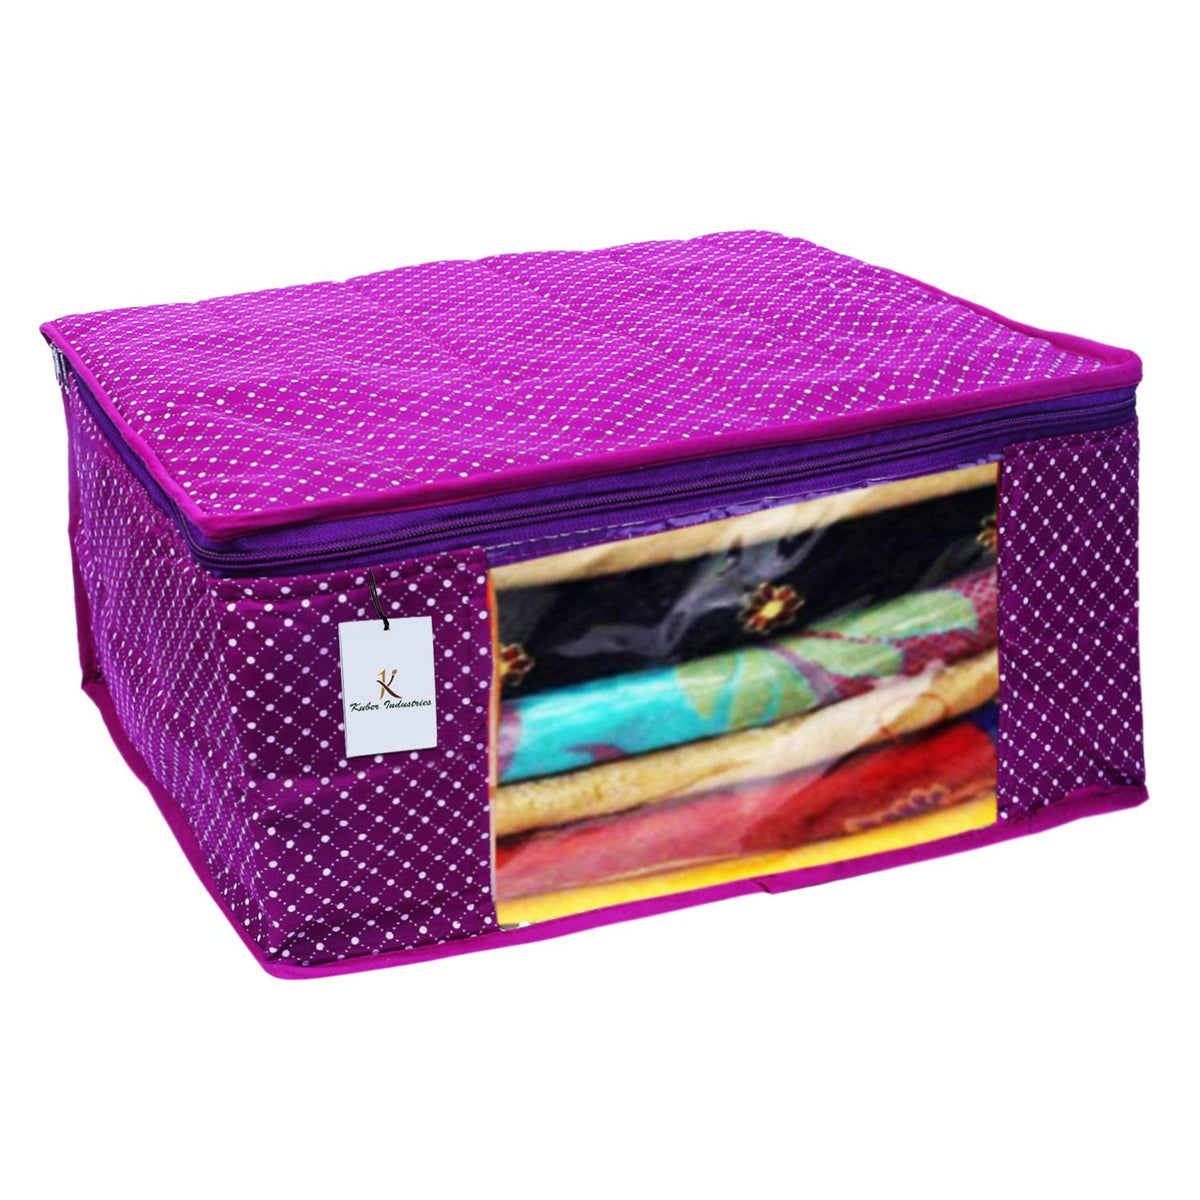 Kuber Industries Polka Dots 1 Piece Cotton 3 Layered Quilted Saree Cover, Purple-CTKTC025811